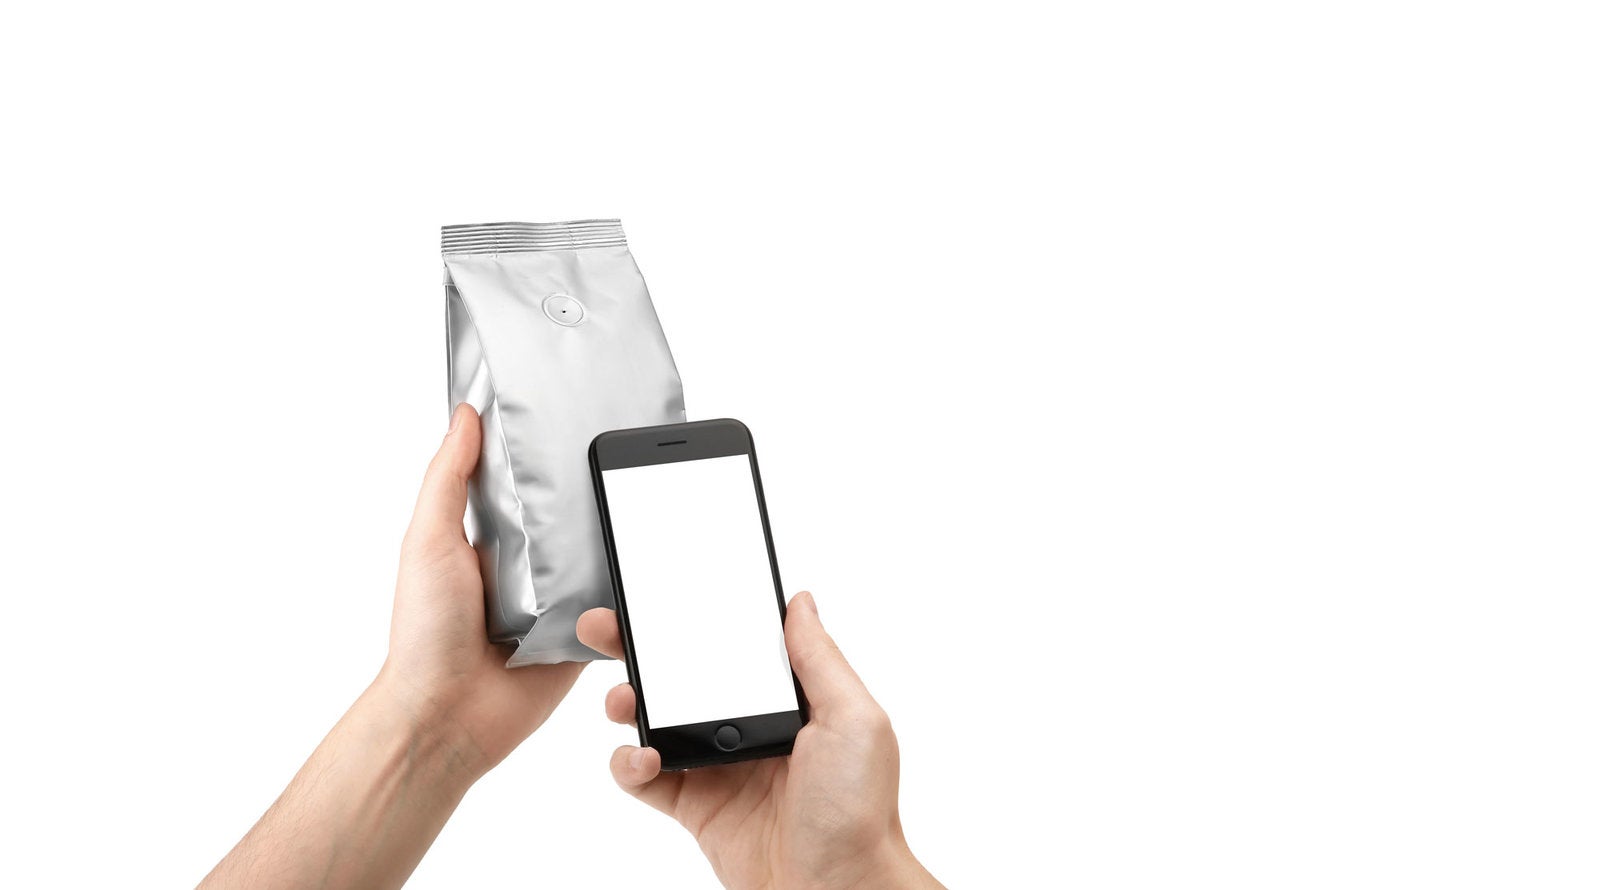 Safety drivers poise NFC packaging for growth in 2021